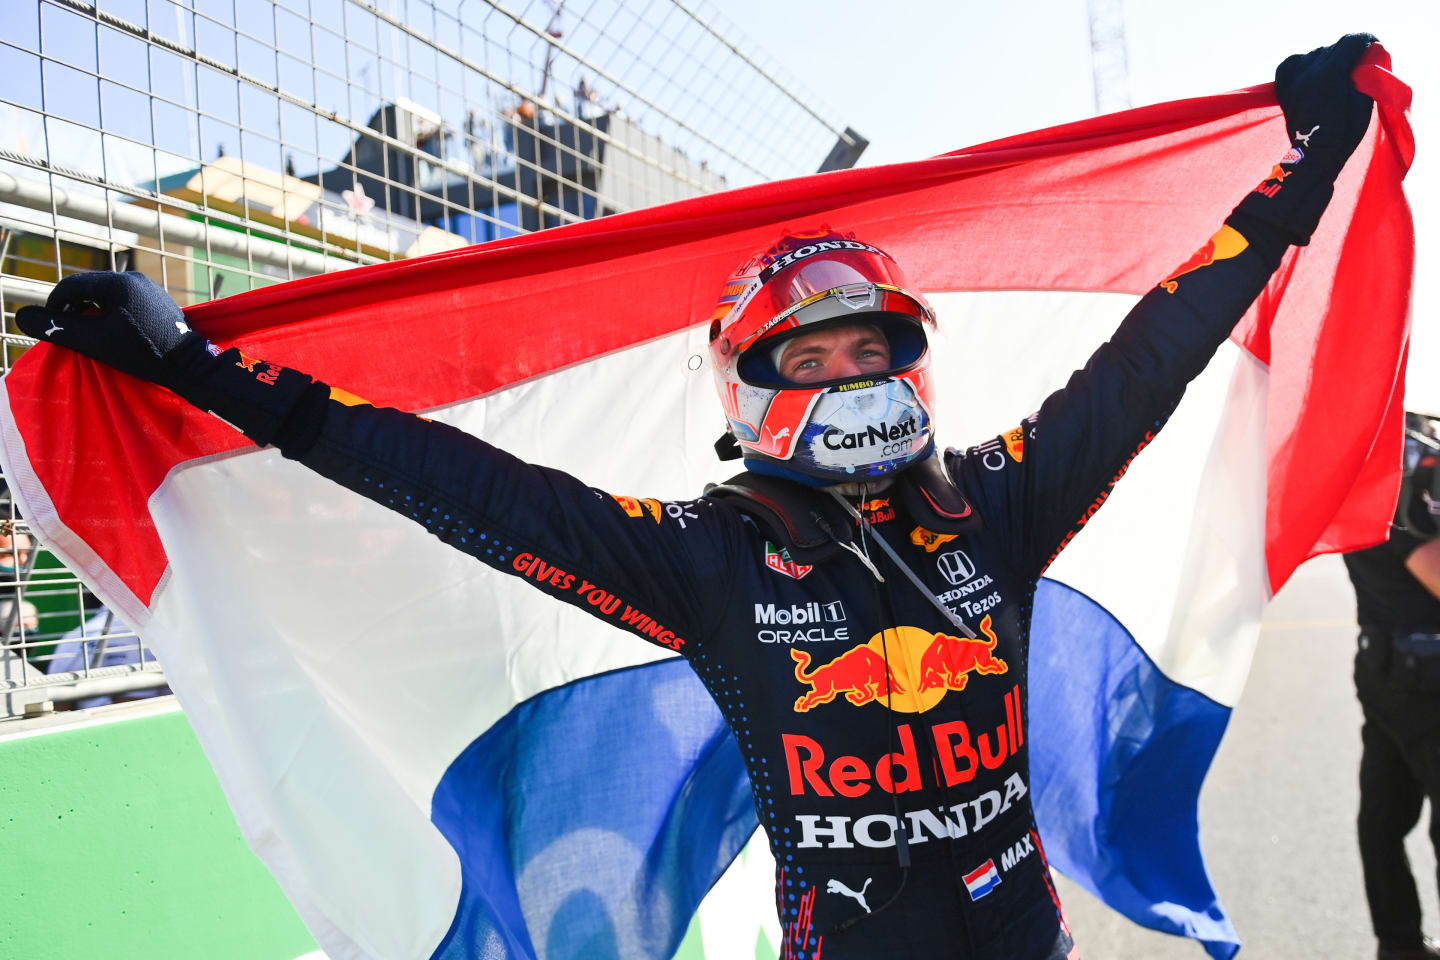 ZANDVOORT, NETHERLANDS - SEPTEMBER 05: Race winner Max Verstappen of Netherlands and Red Bull Racing celebrates in parc ferme during the F1 Grand Prix of The Netherlands at Circuit Zandvoort on September 05, 2021 in Zandvoort, Netherlands. (Photo by Dan Mullan/Getty Images)